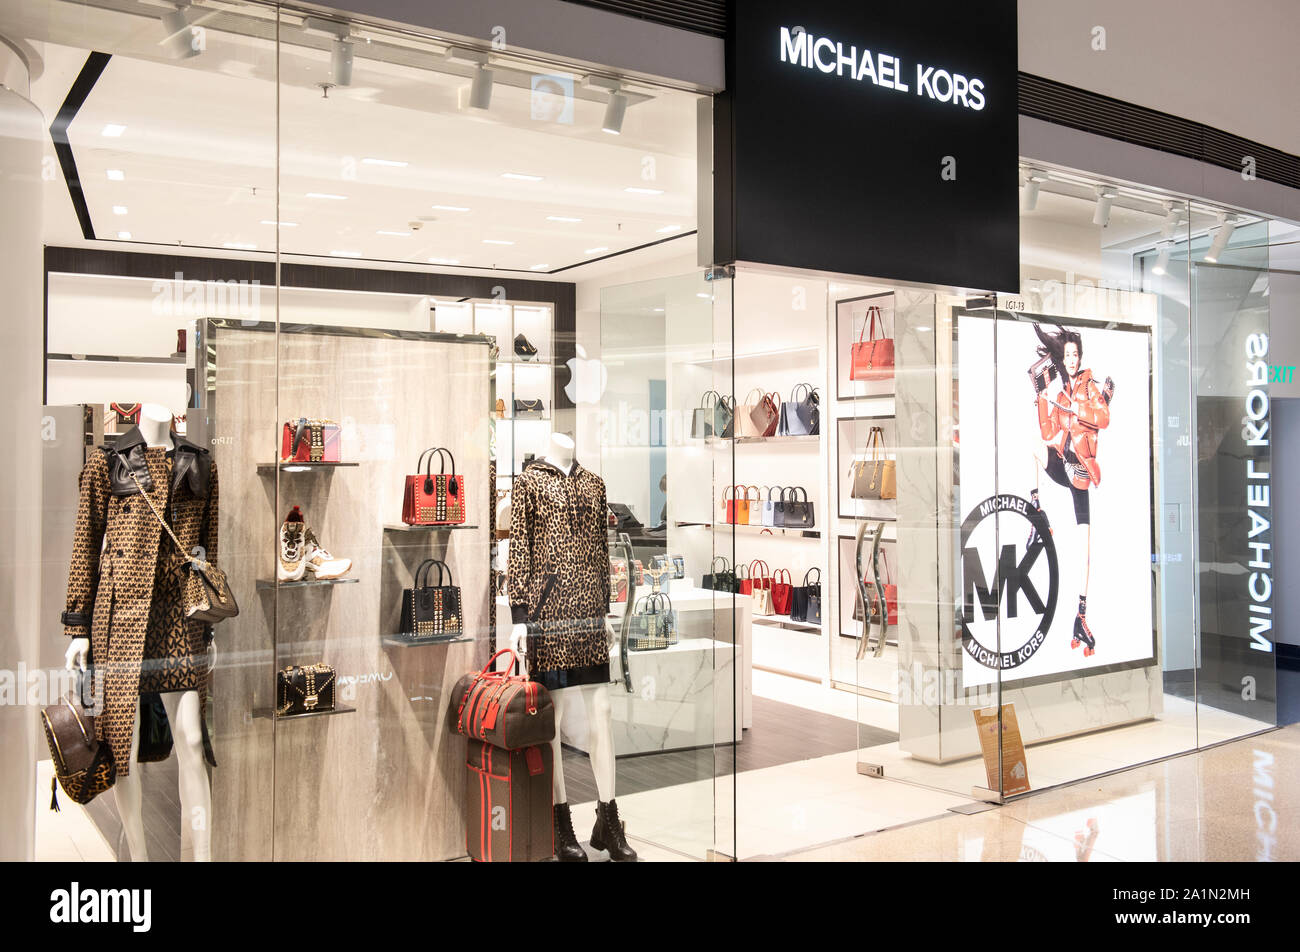 Price Increases at Michael Kors and Inflation Hit Capris Q3 Earnings